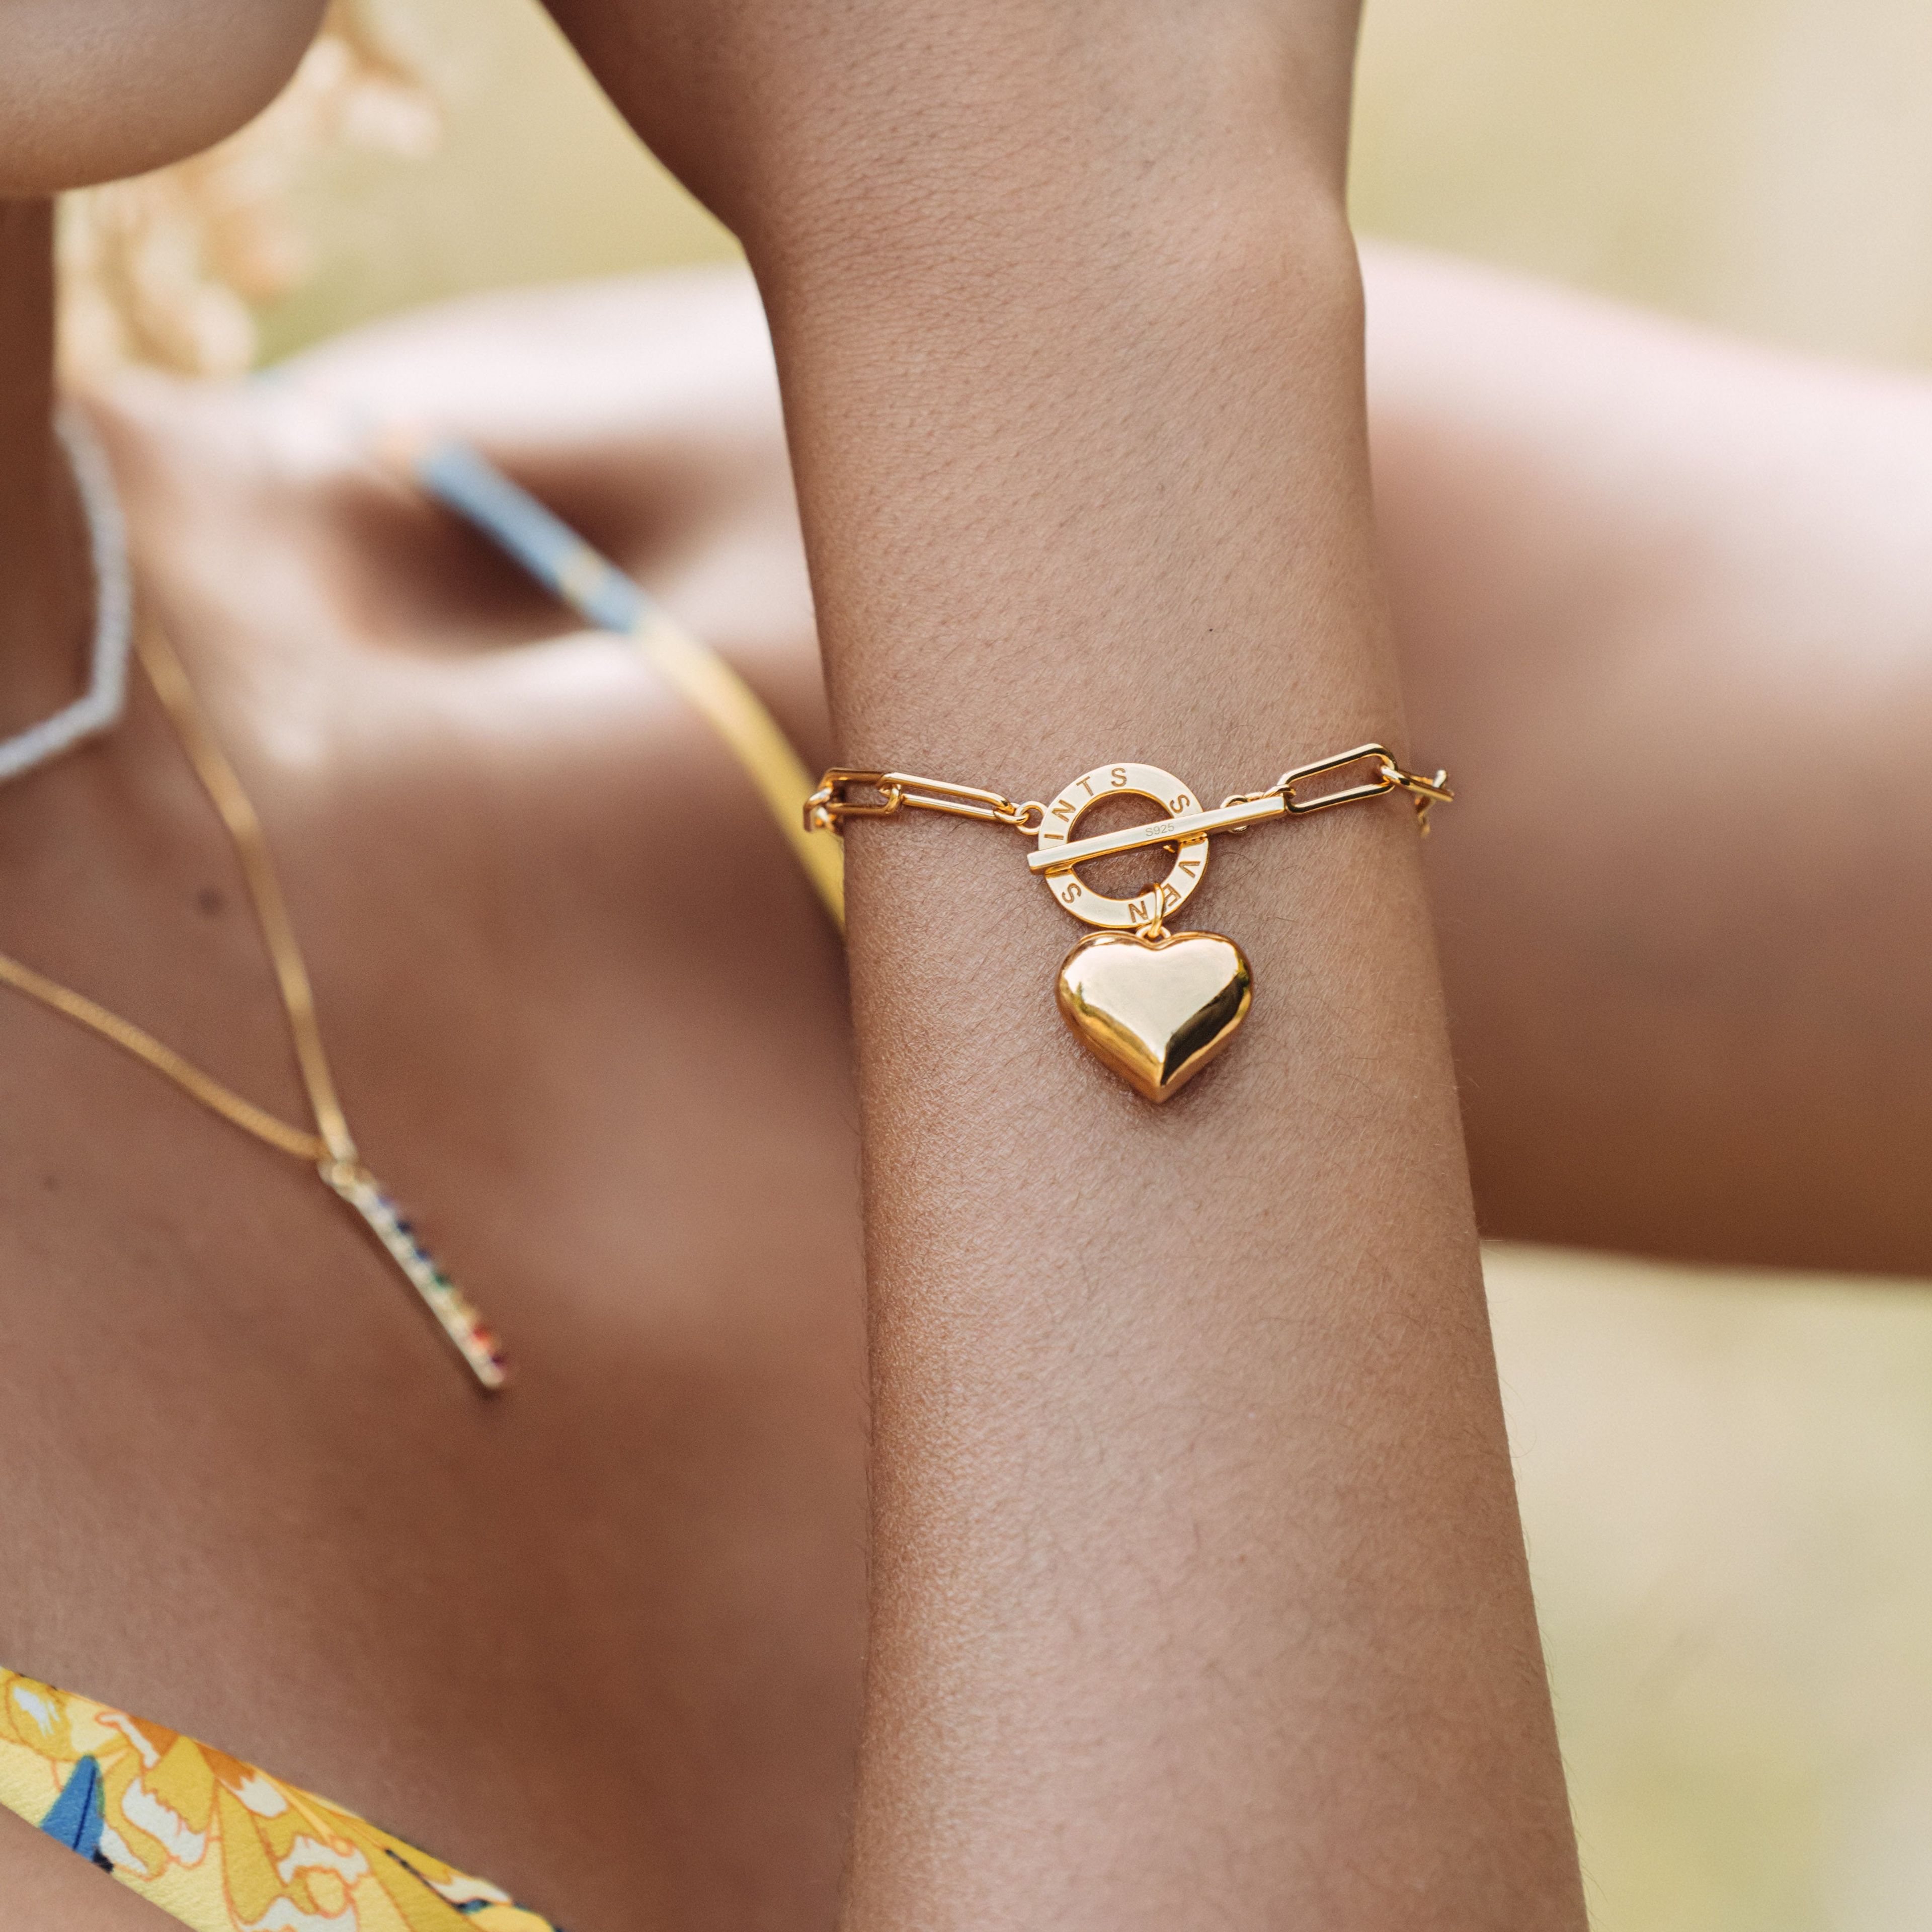 "I AM LOVED" Heart Charm Chain Bracelet, 18k Gold Plated Sterling Silver